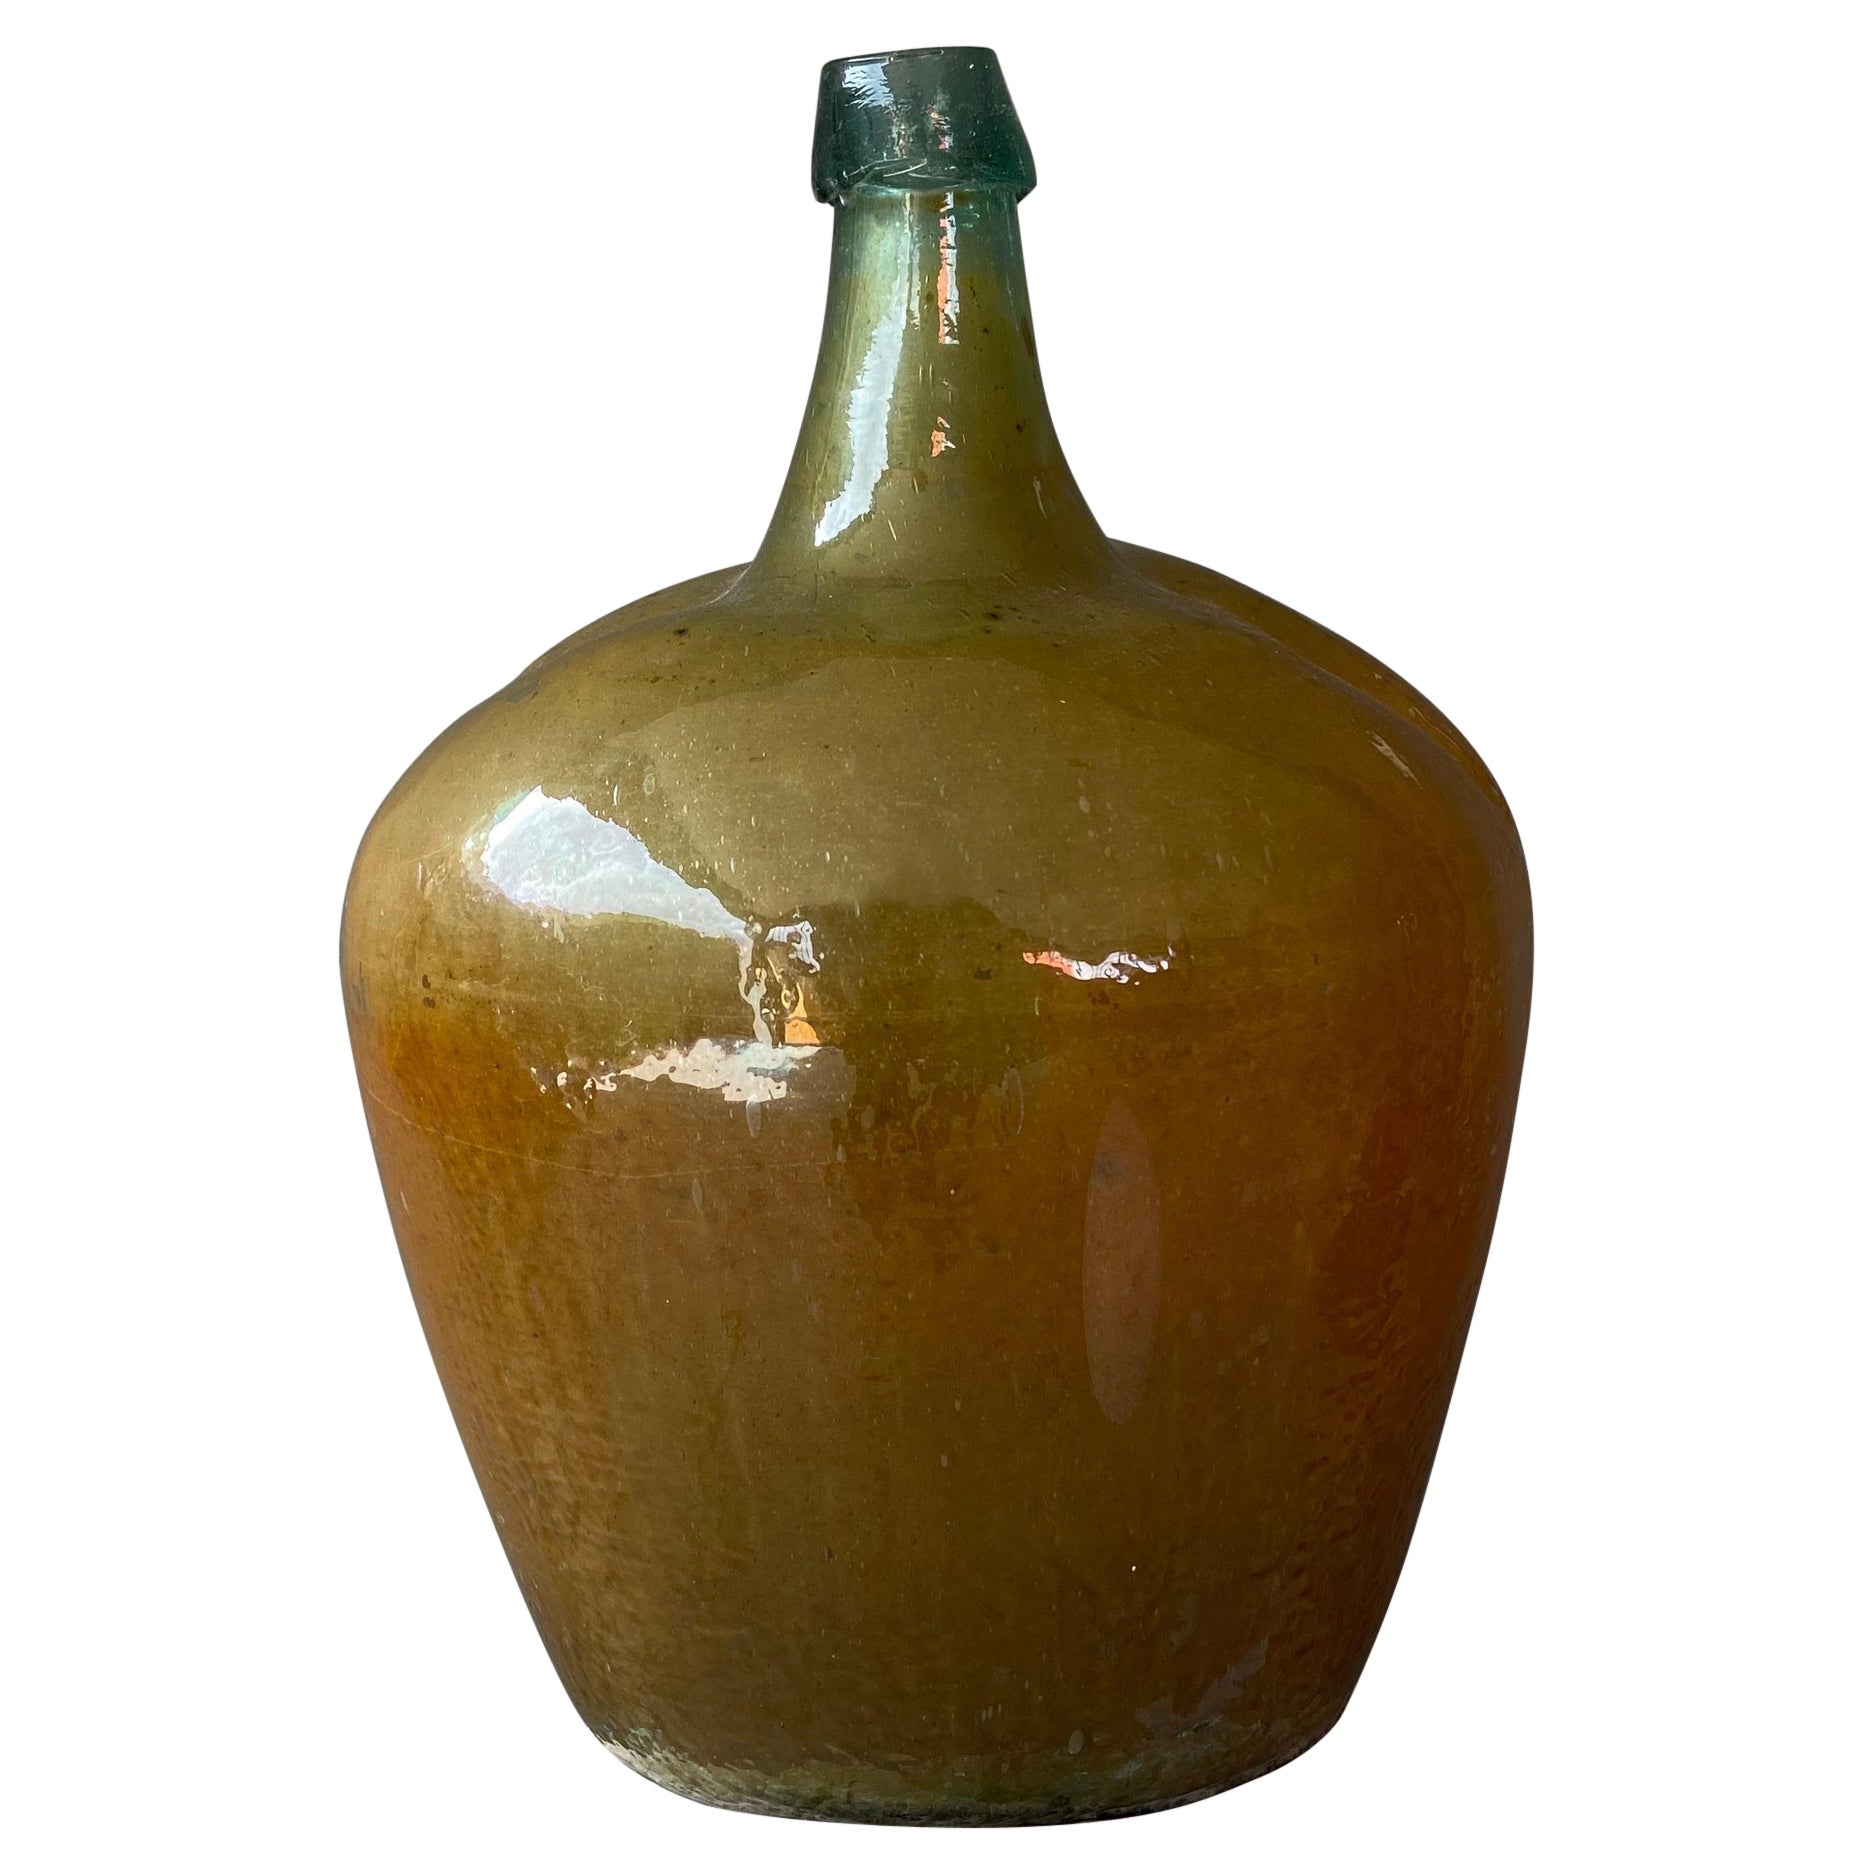 Late 19th Century Mezcal Demijohn Bottle From Mexico